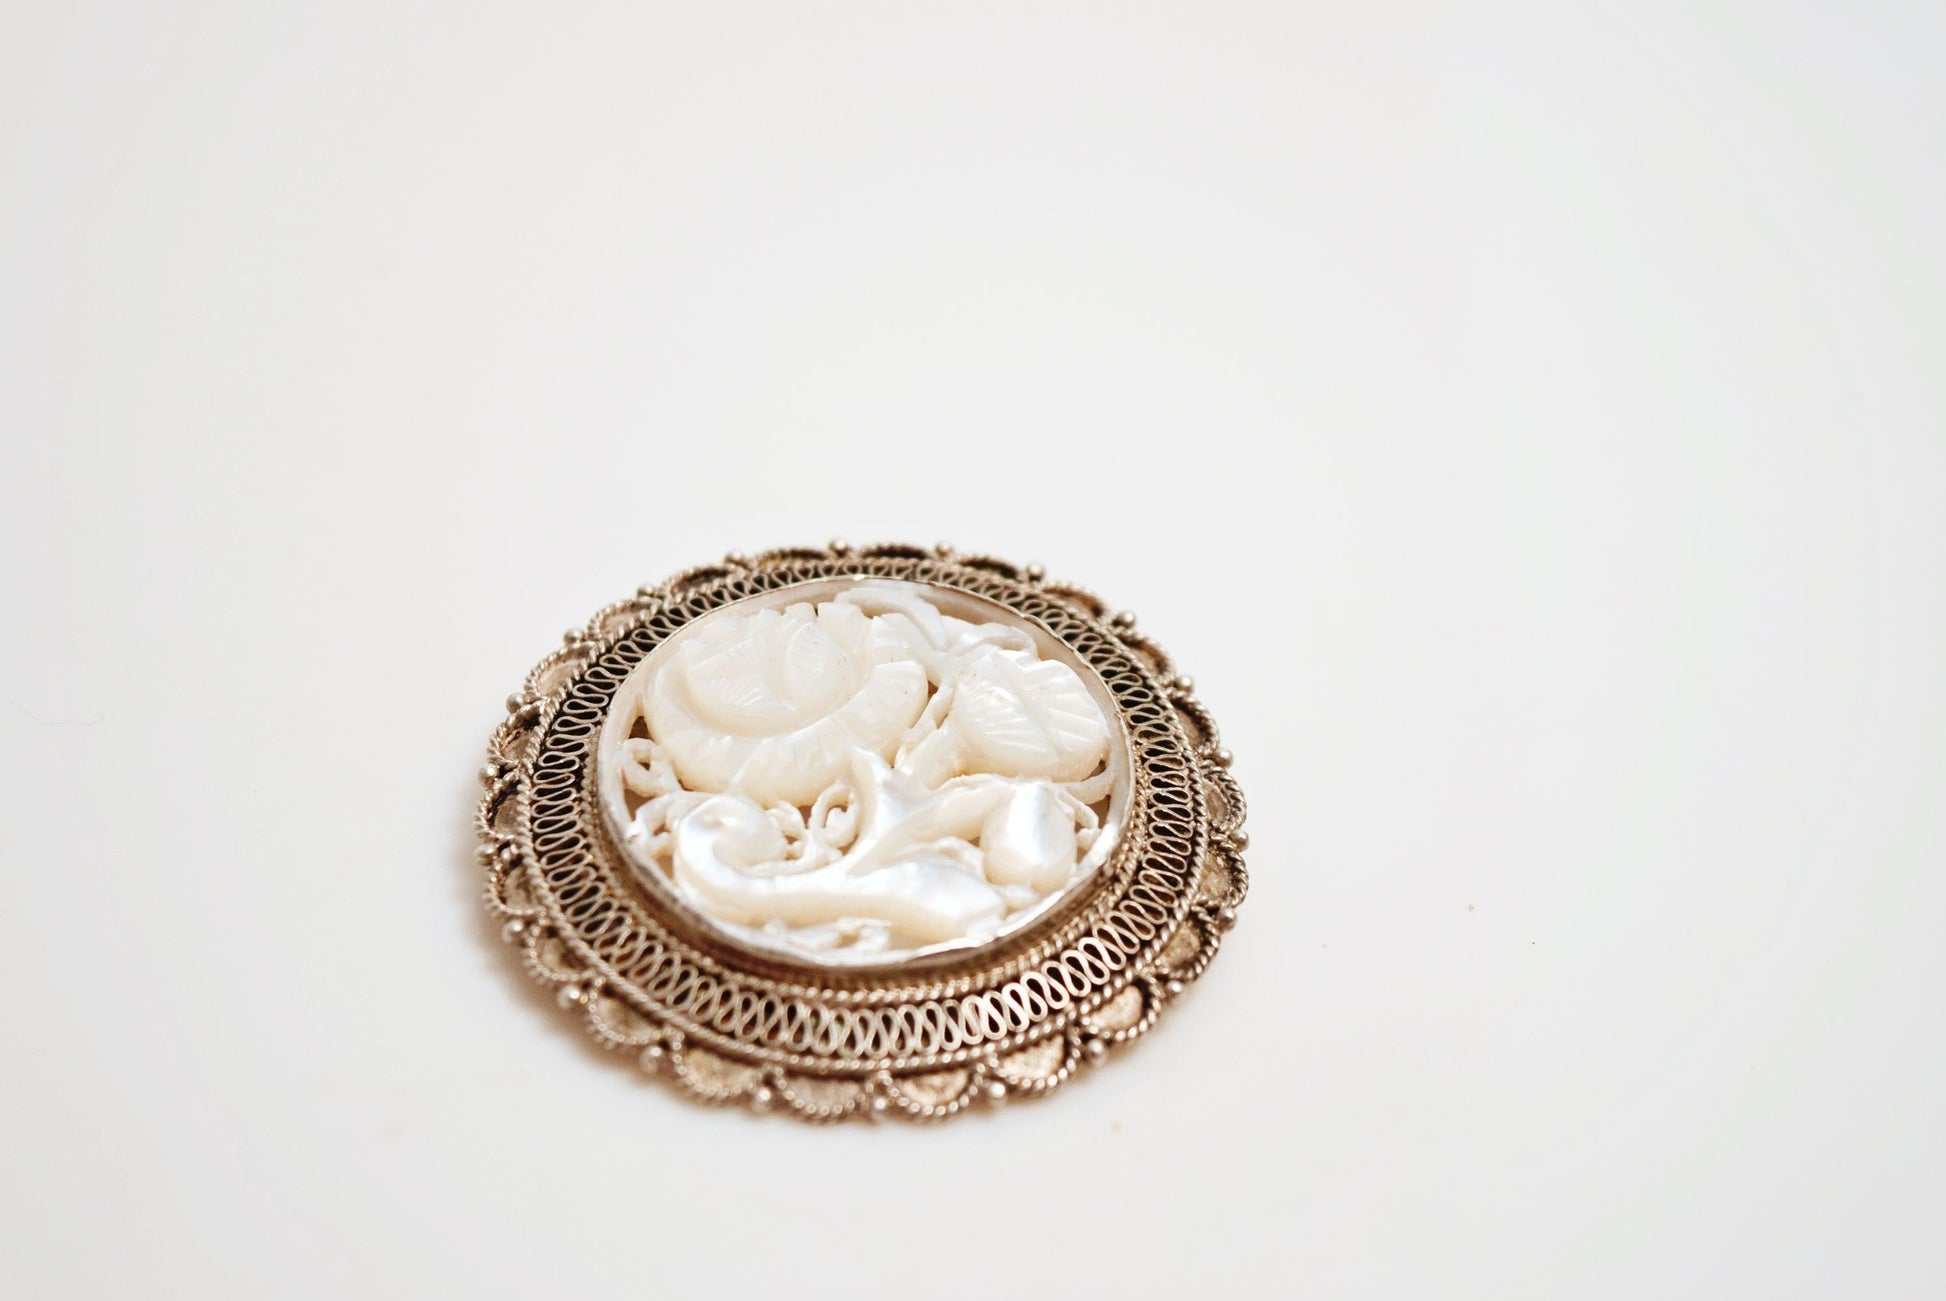 Brooch from the Holy Land